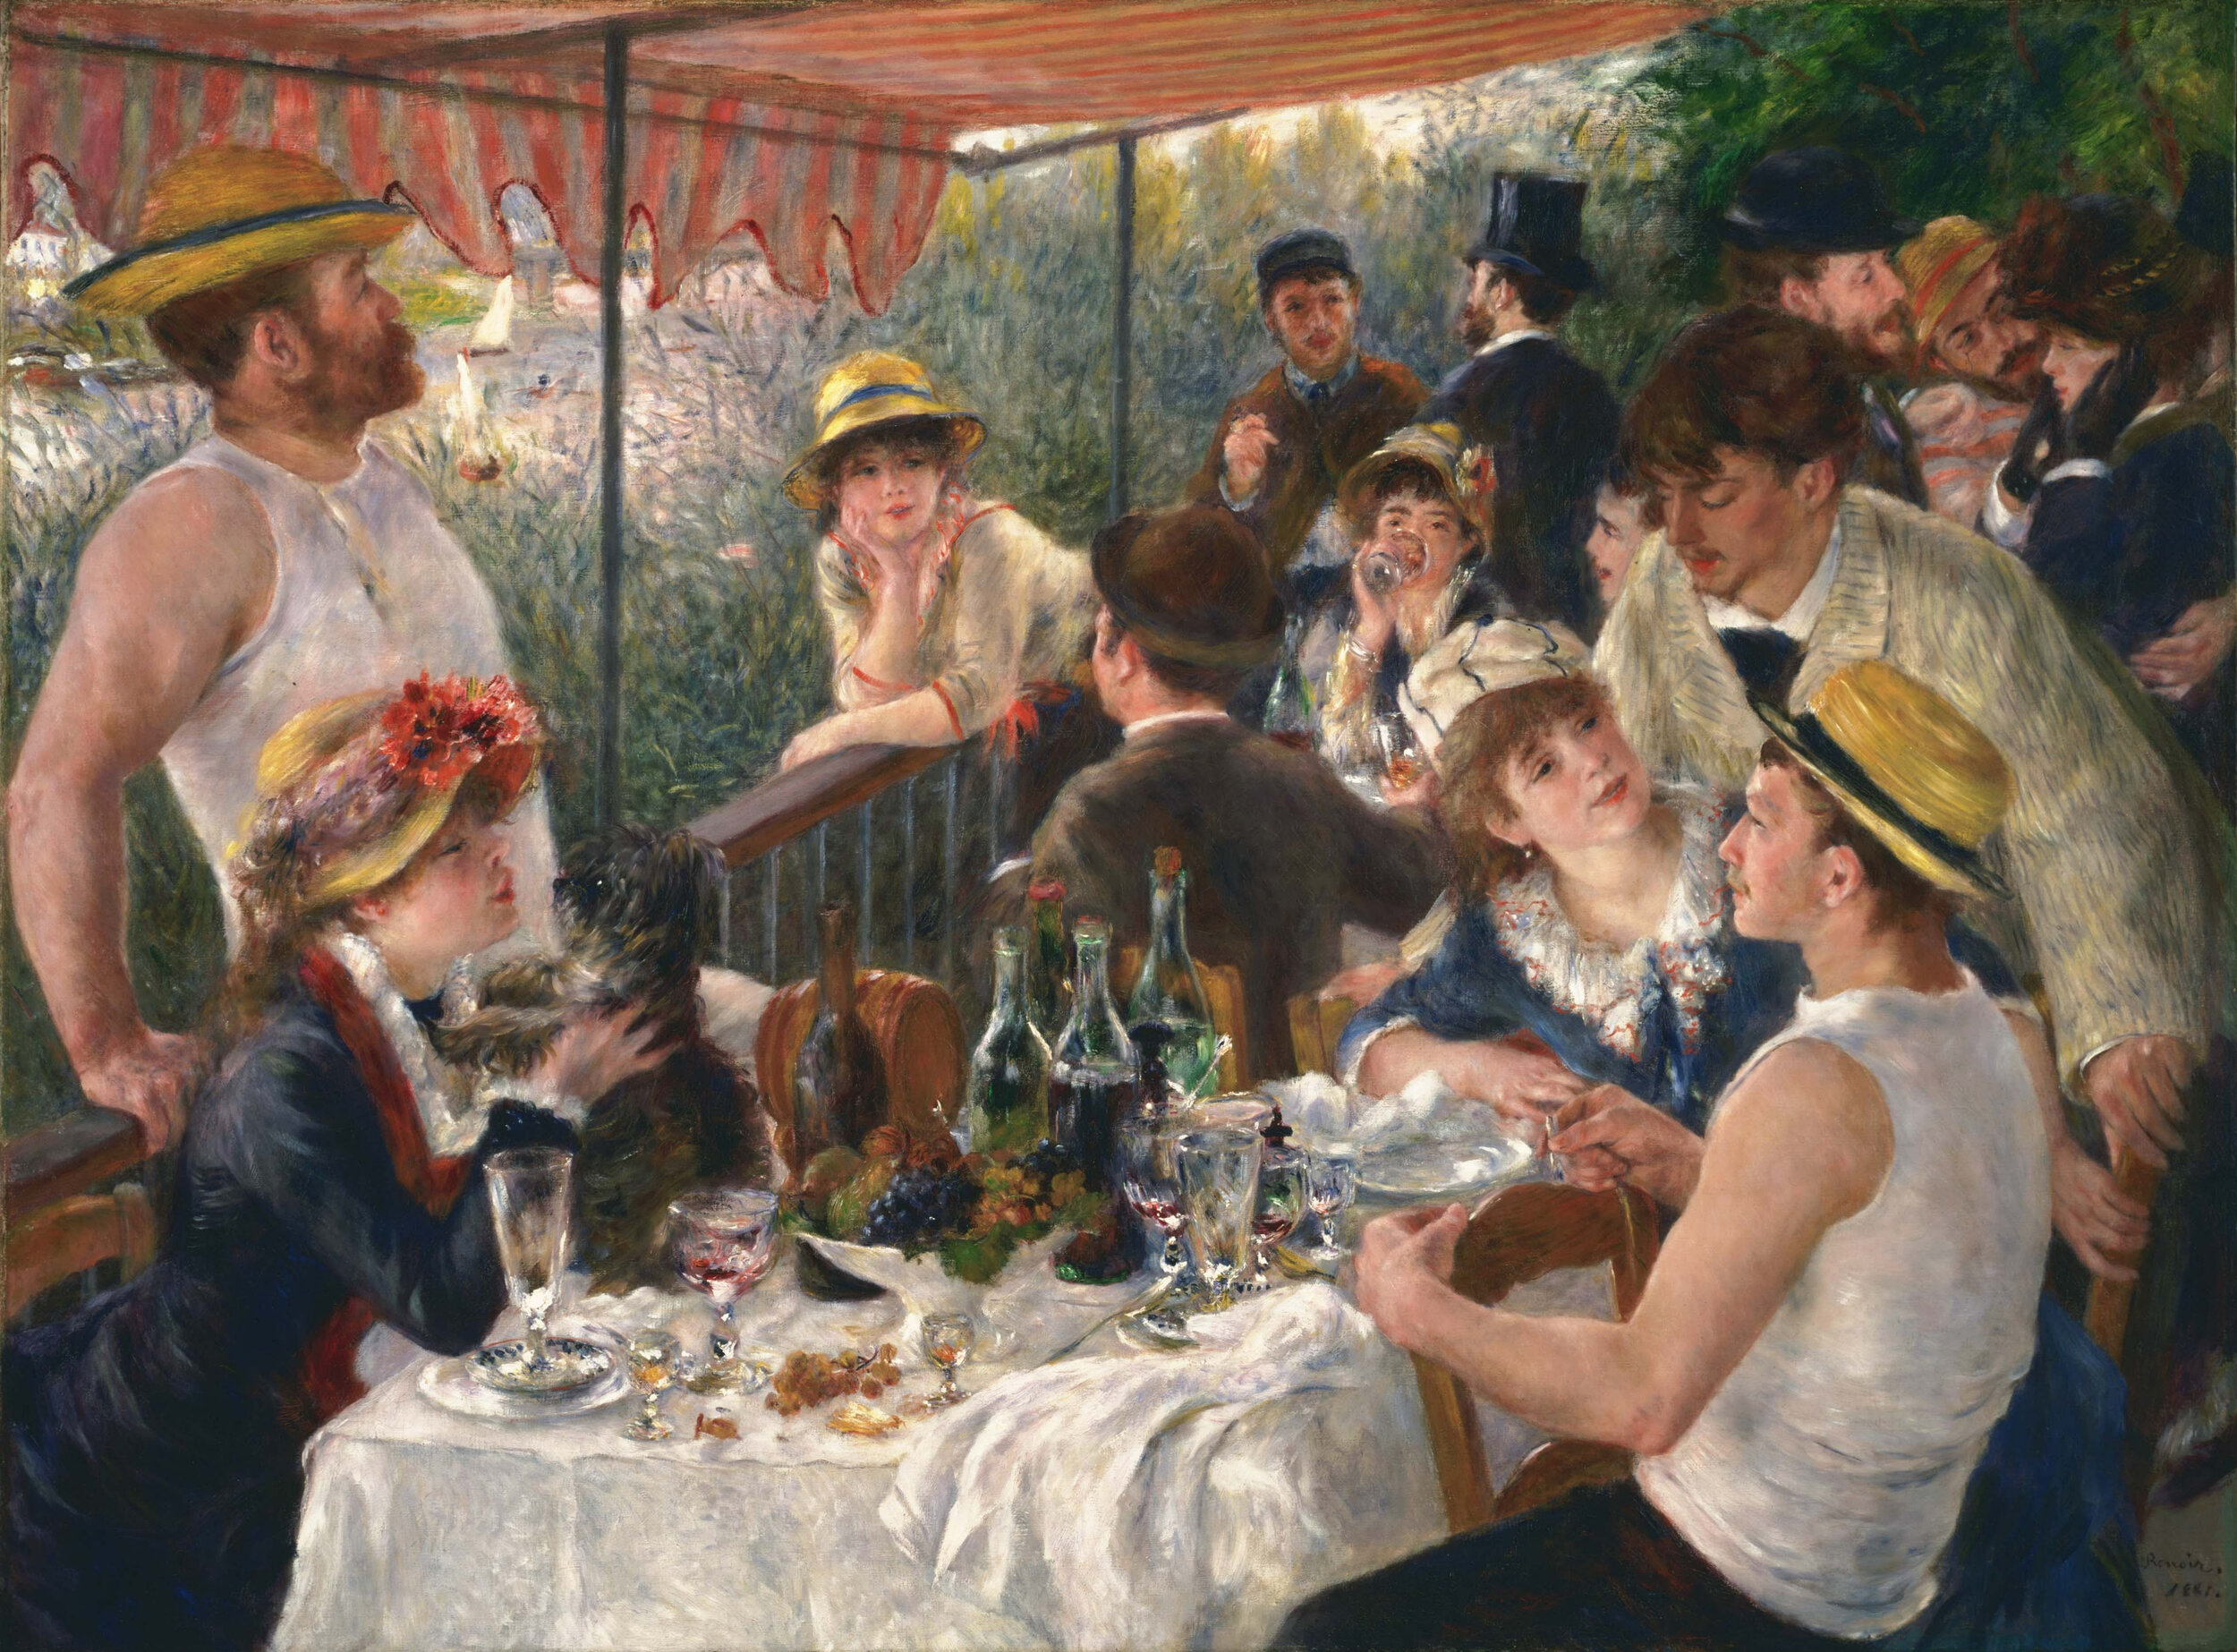 Pierre-Auguste Renoir, Luncheon of the Boating Party, 1880-1881